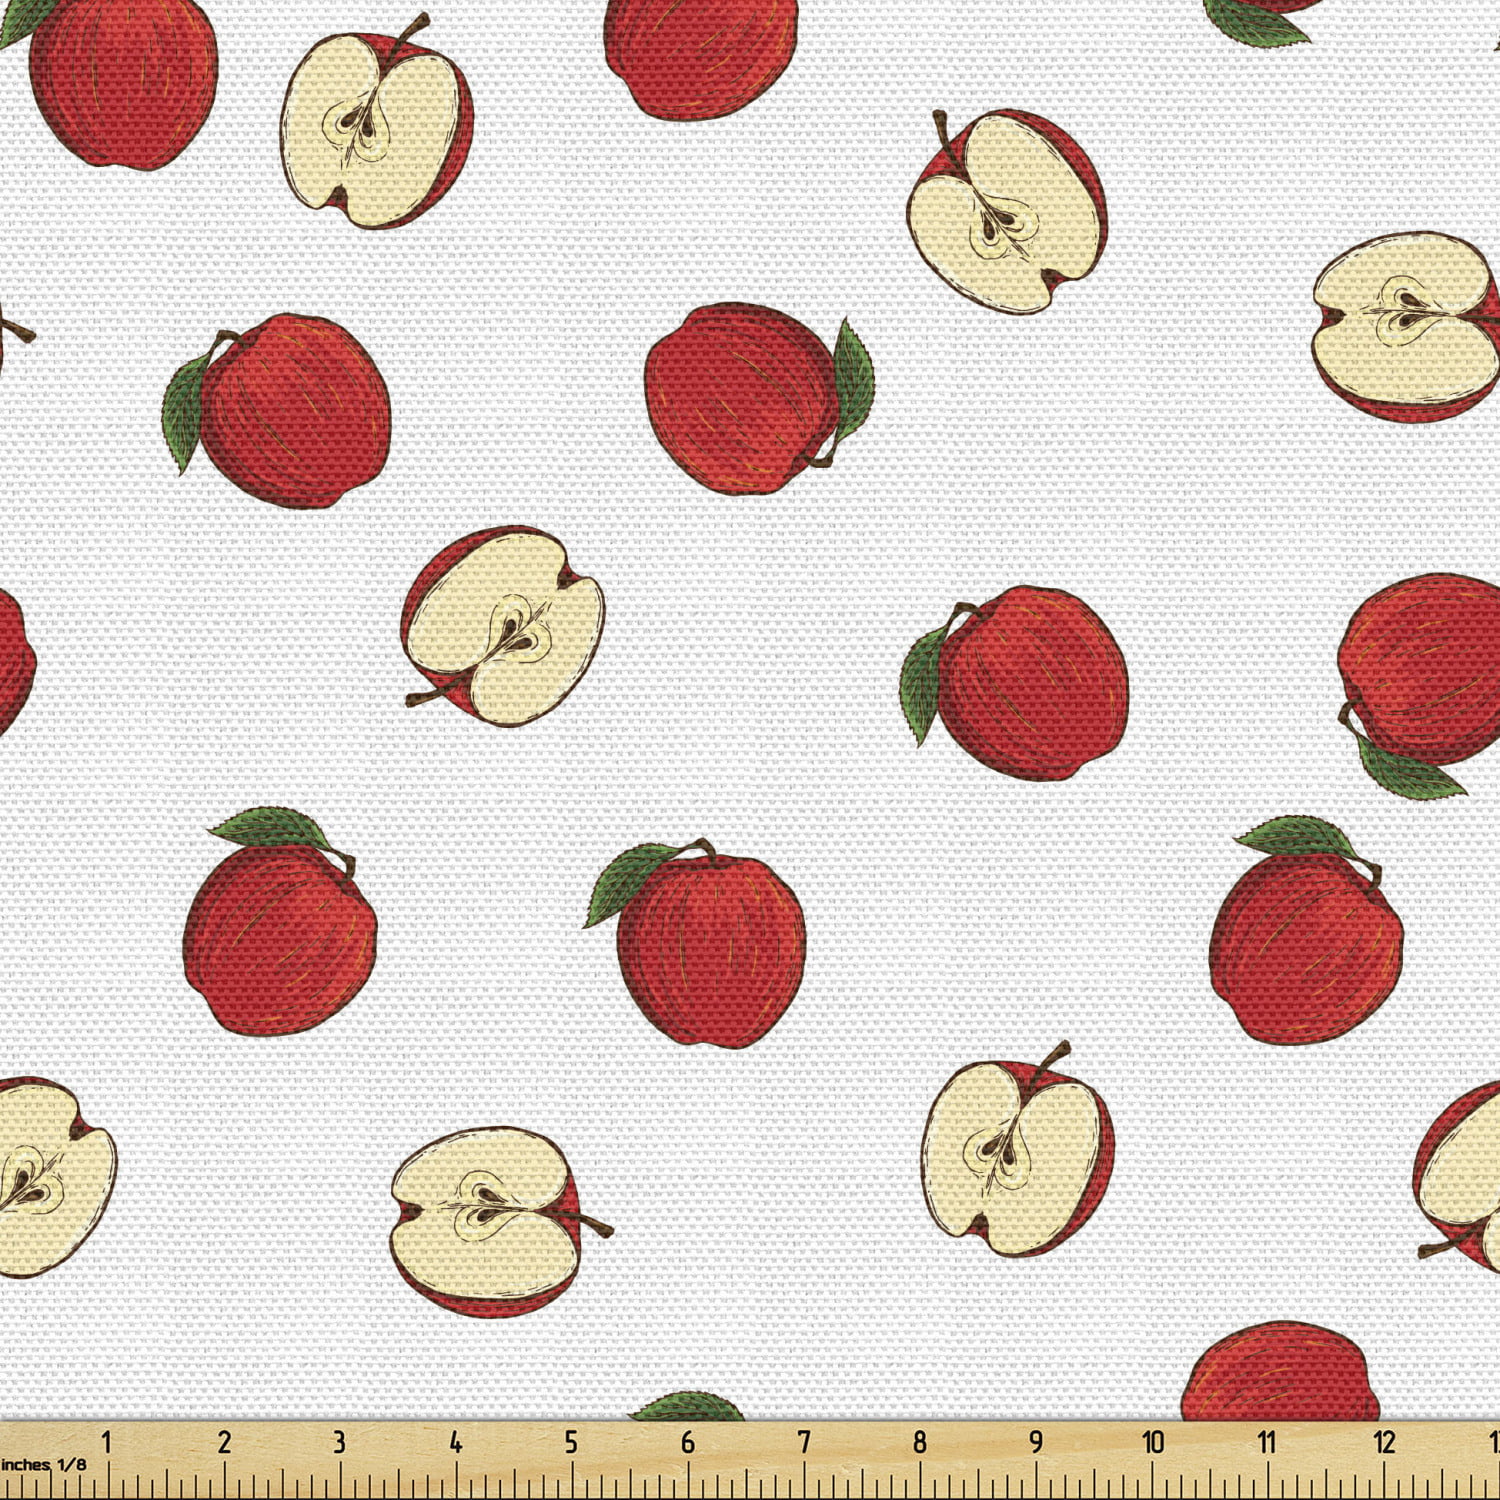 Fruit Picnic Pineapple Red White Blue Patriotic Spoonflower Fabric by the Yard 